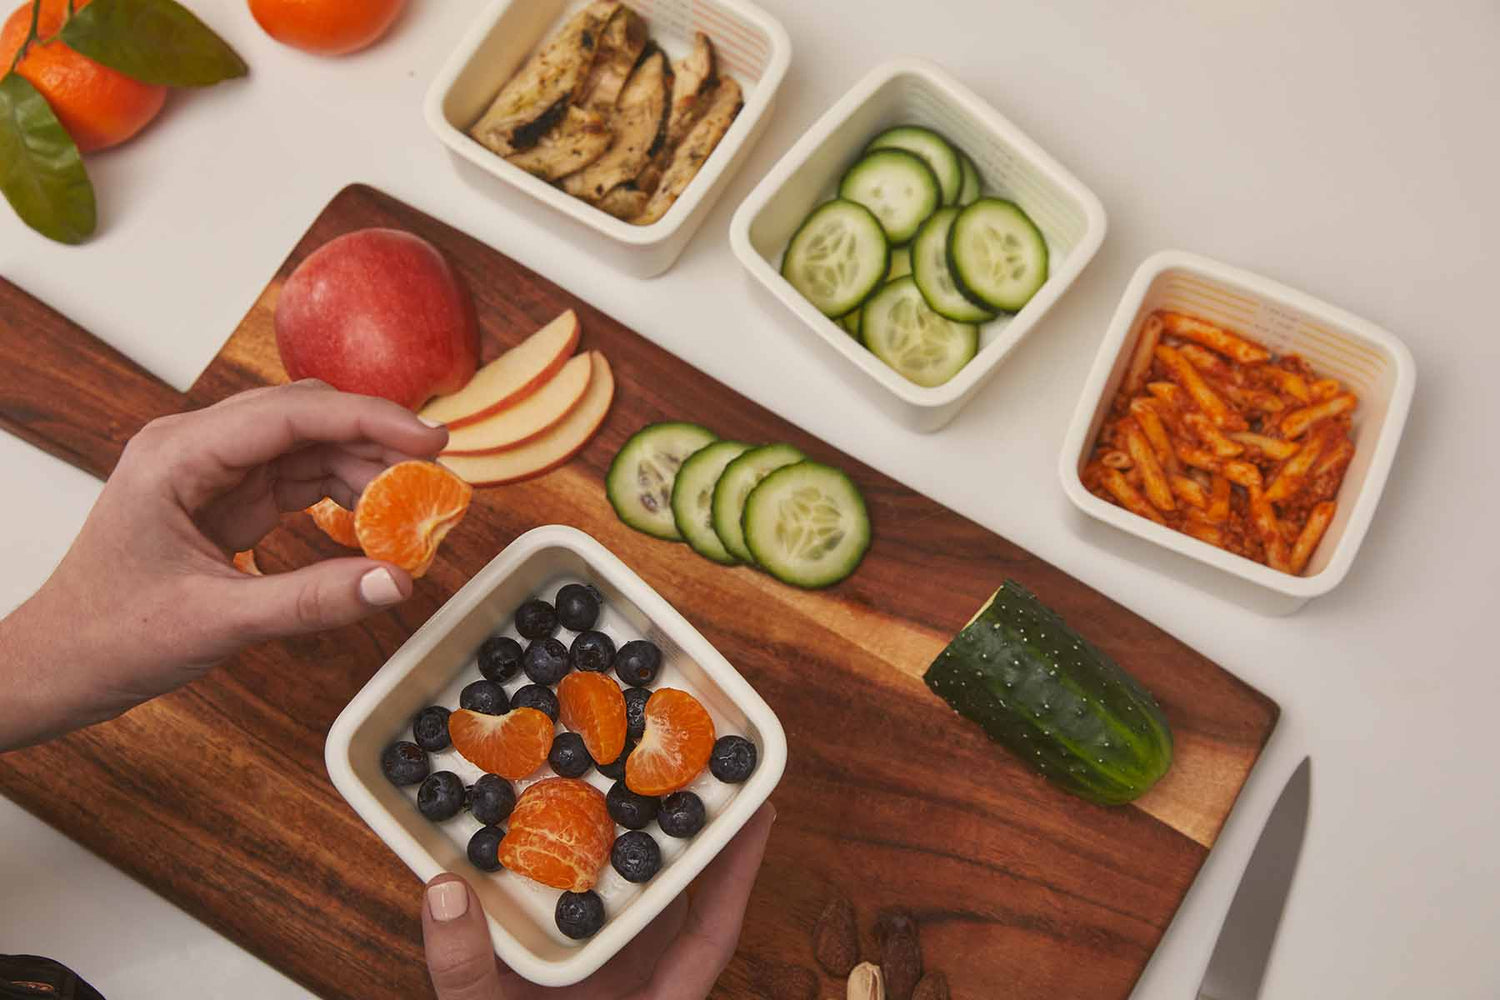 Portion control containers vs. calorie counting